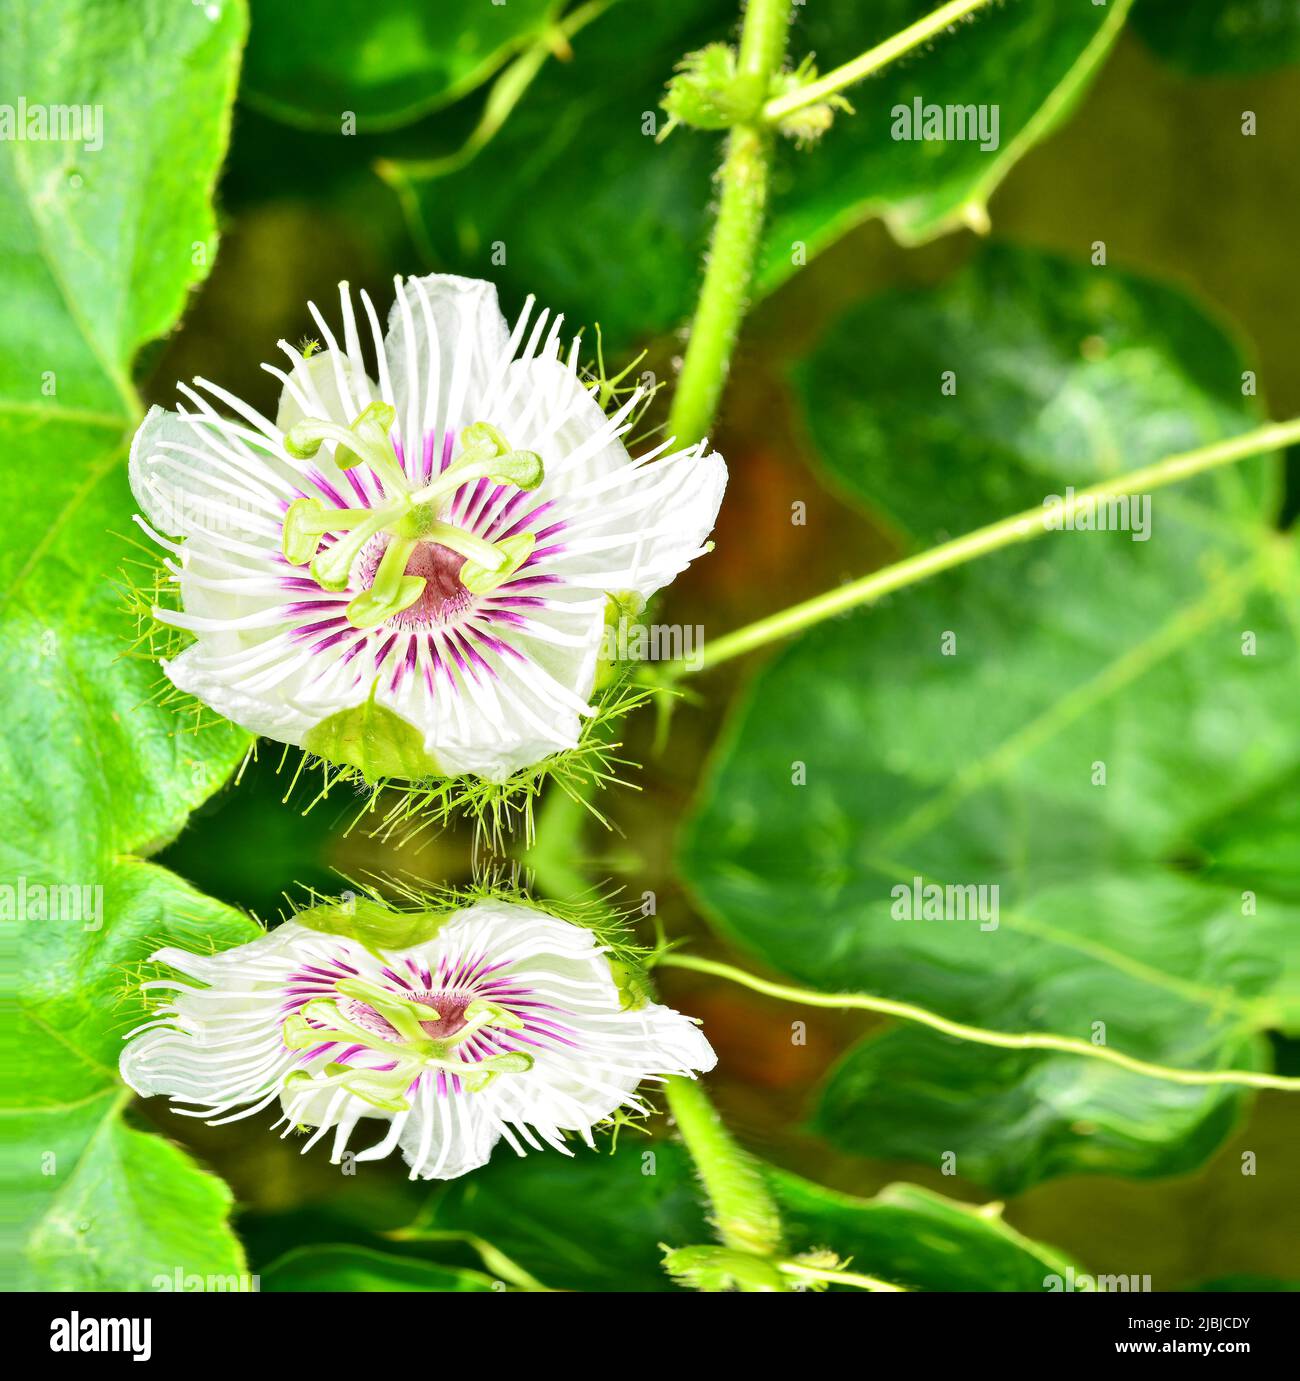 Scarletfruit passionflower blooming in garden with reflect Stock Photo